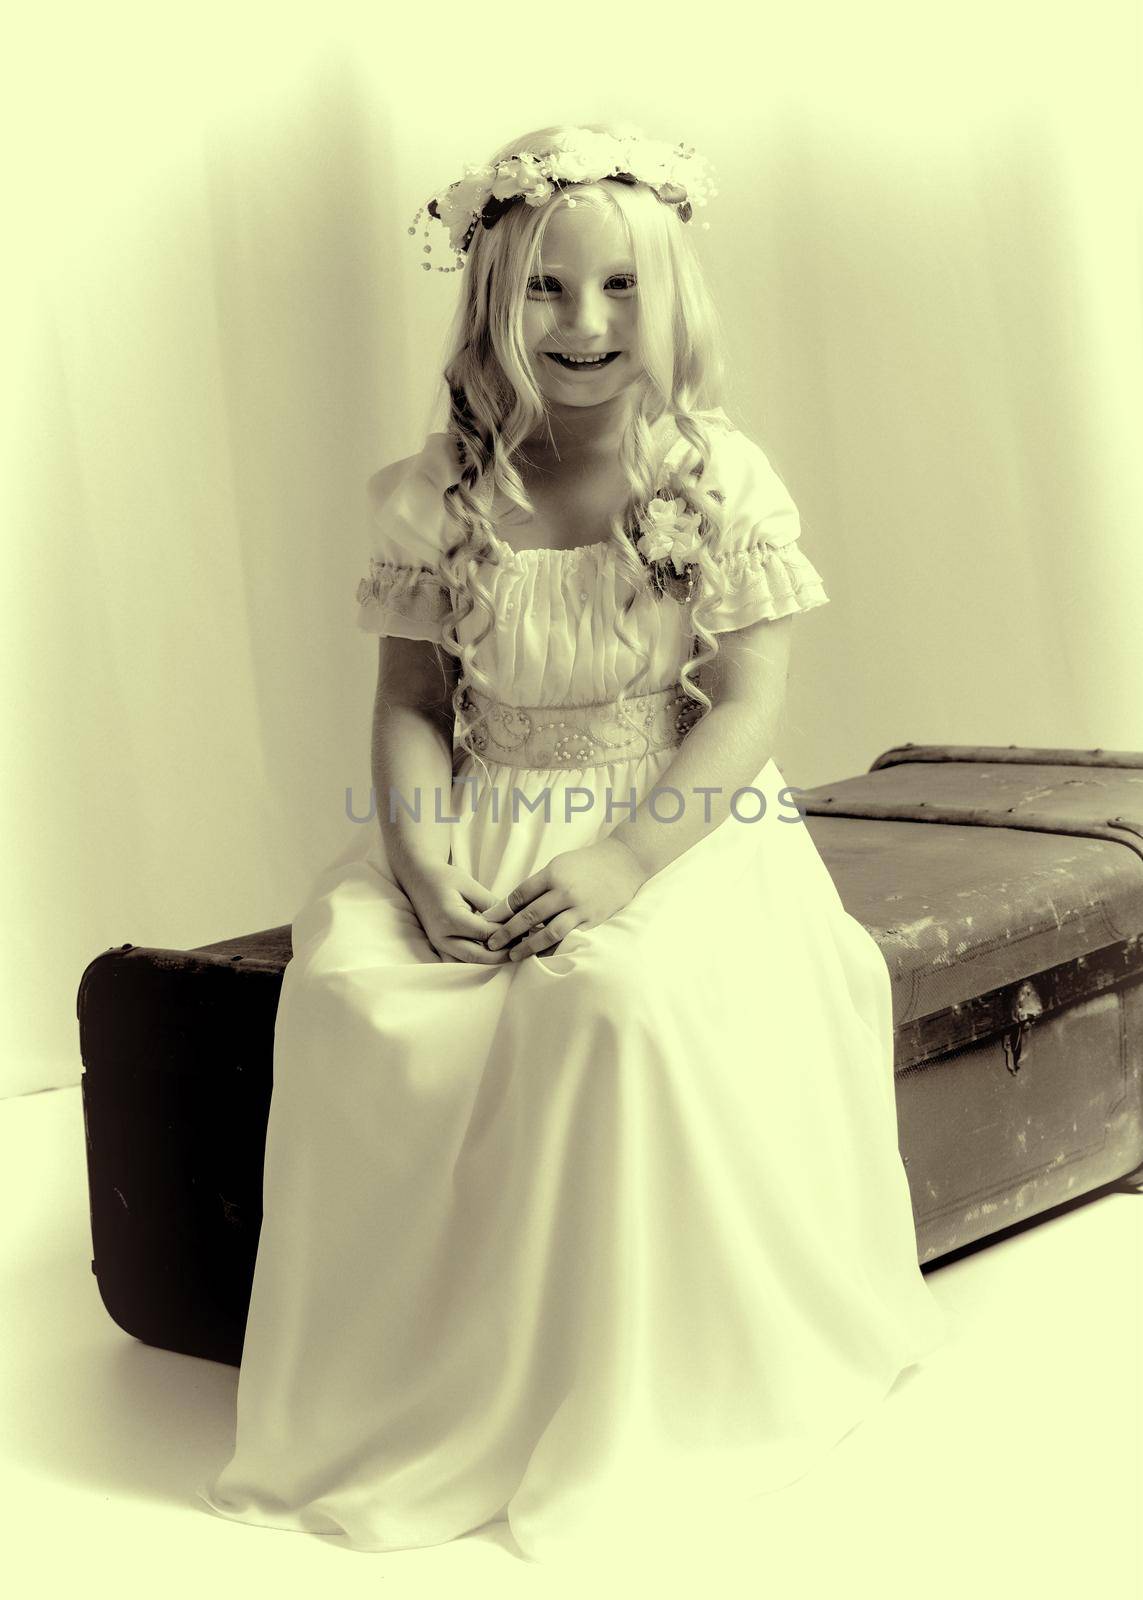 A nice little girl is sitting on an old suitcase. Retro style.